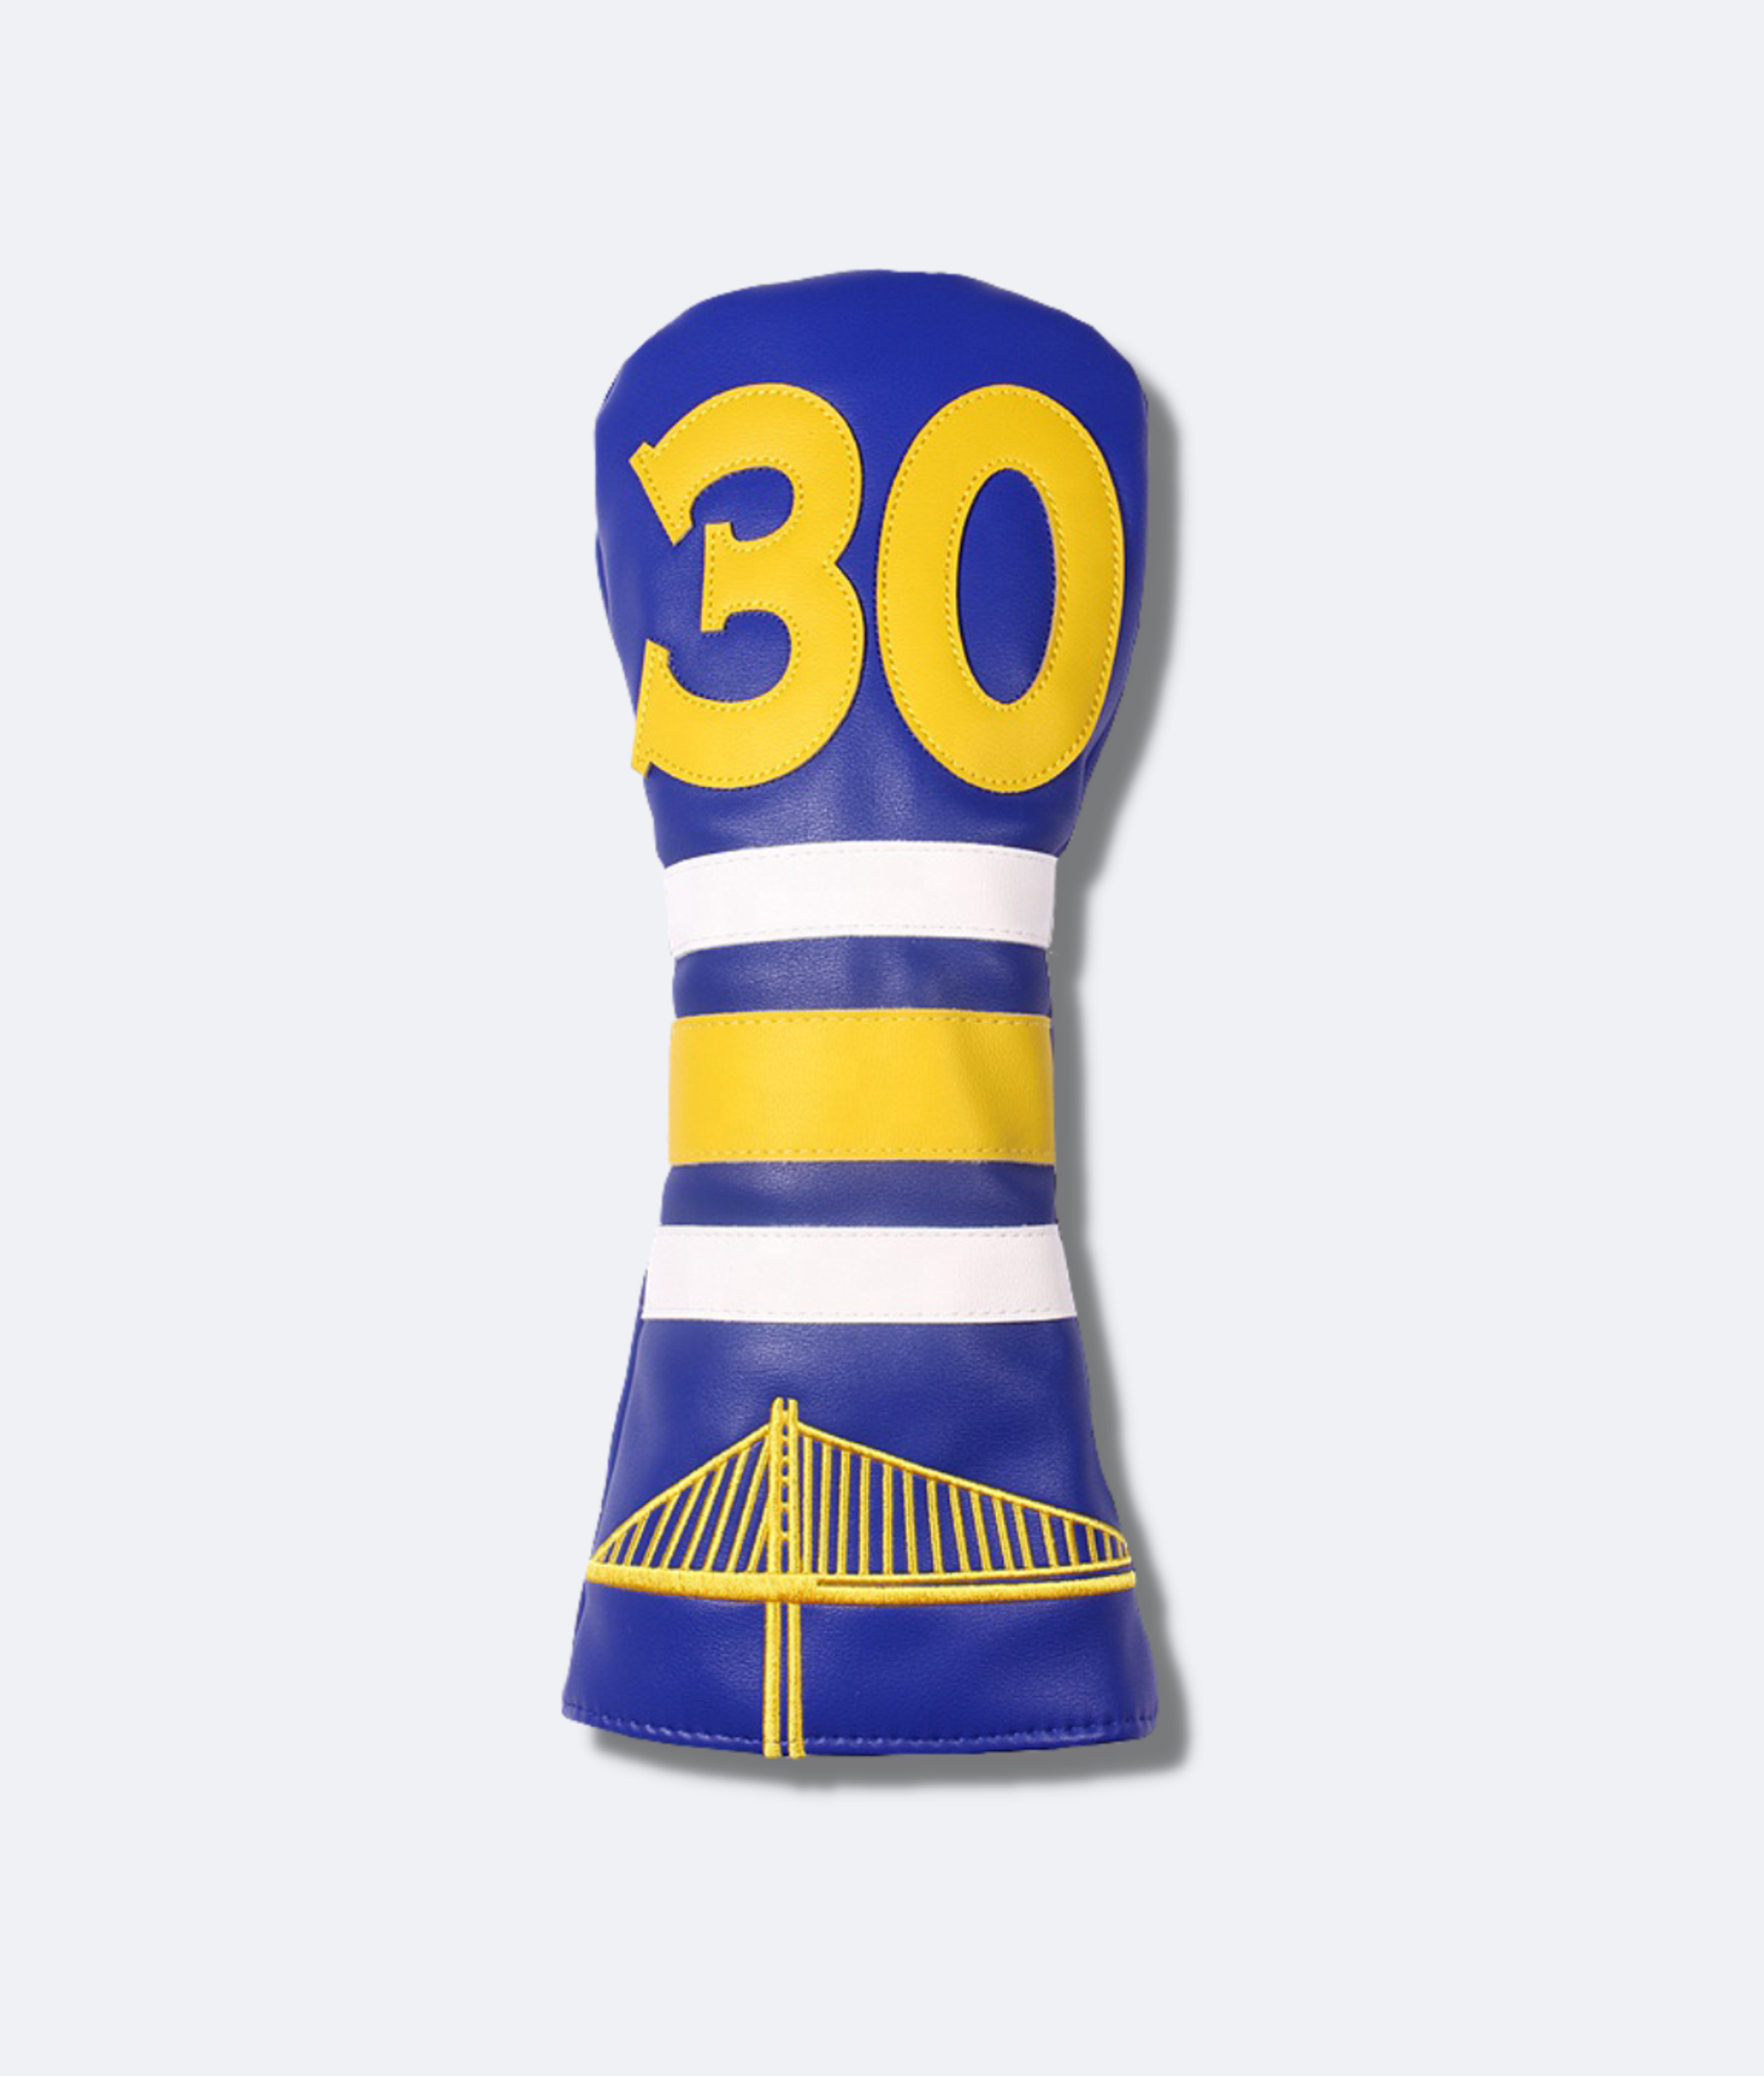 G.O.A.T Curry 30 Headcover